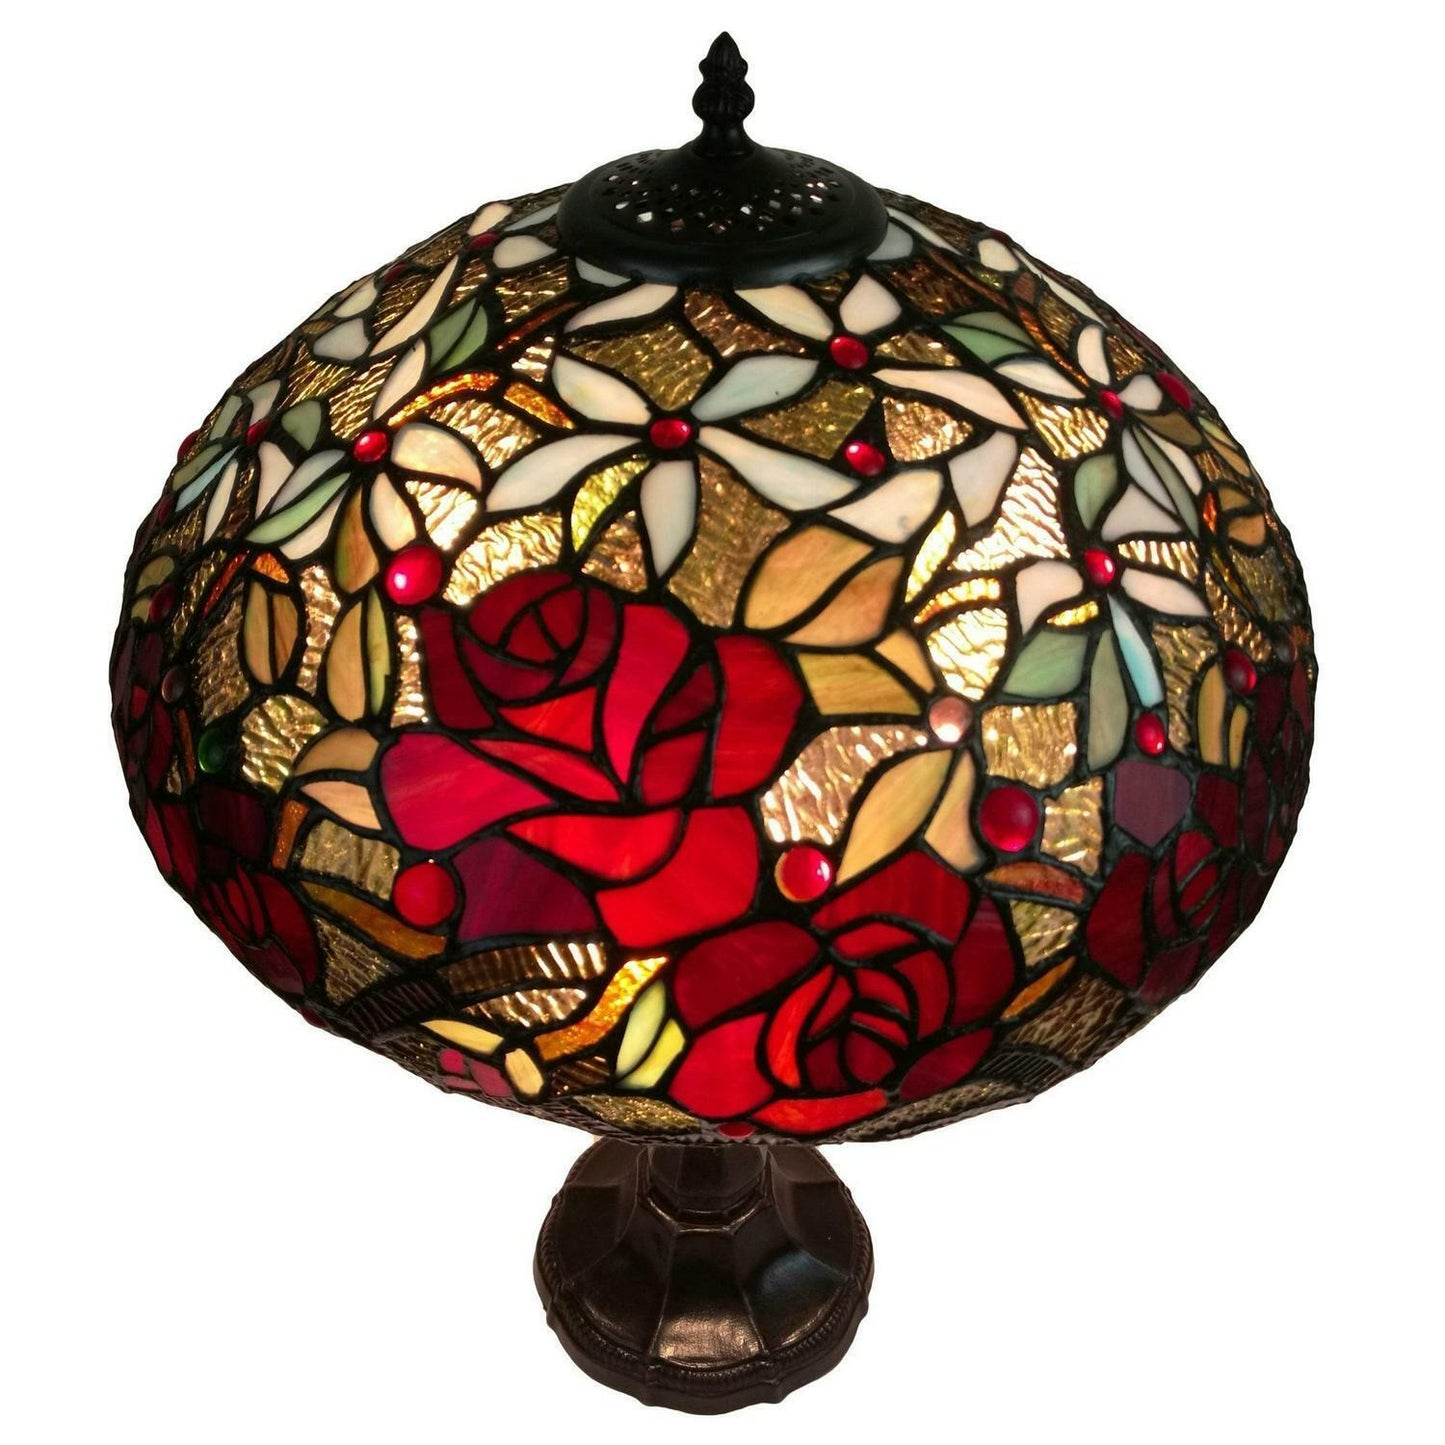 Tiffany Style Table Lamp 24in Tall Stained Glass Floral Roses Theme Accent Lamp